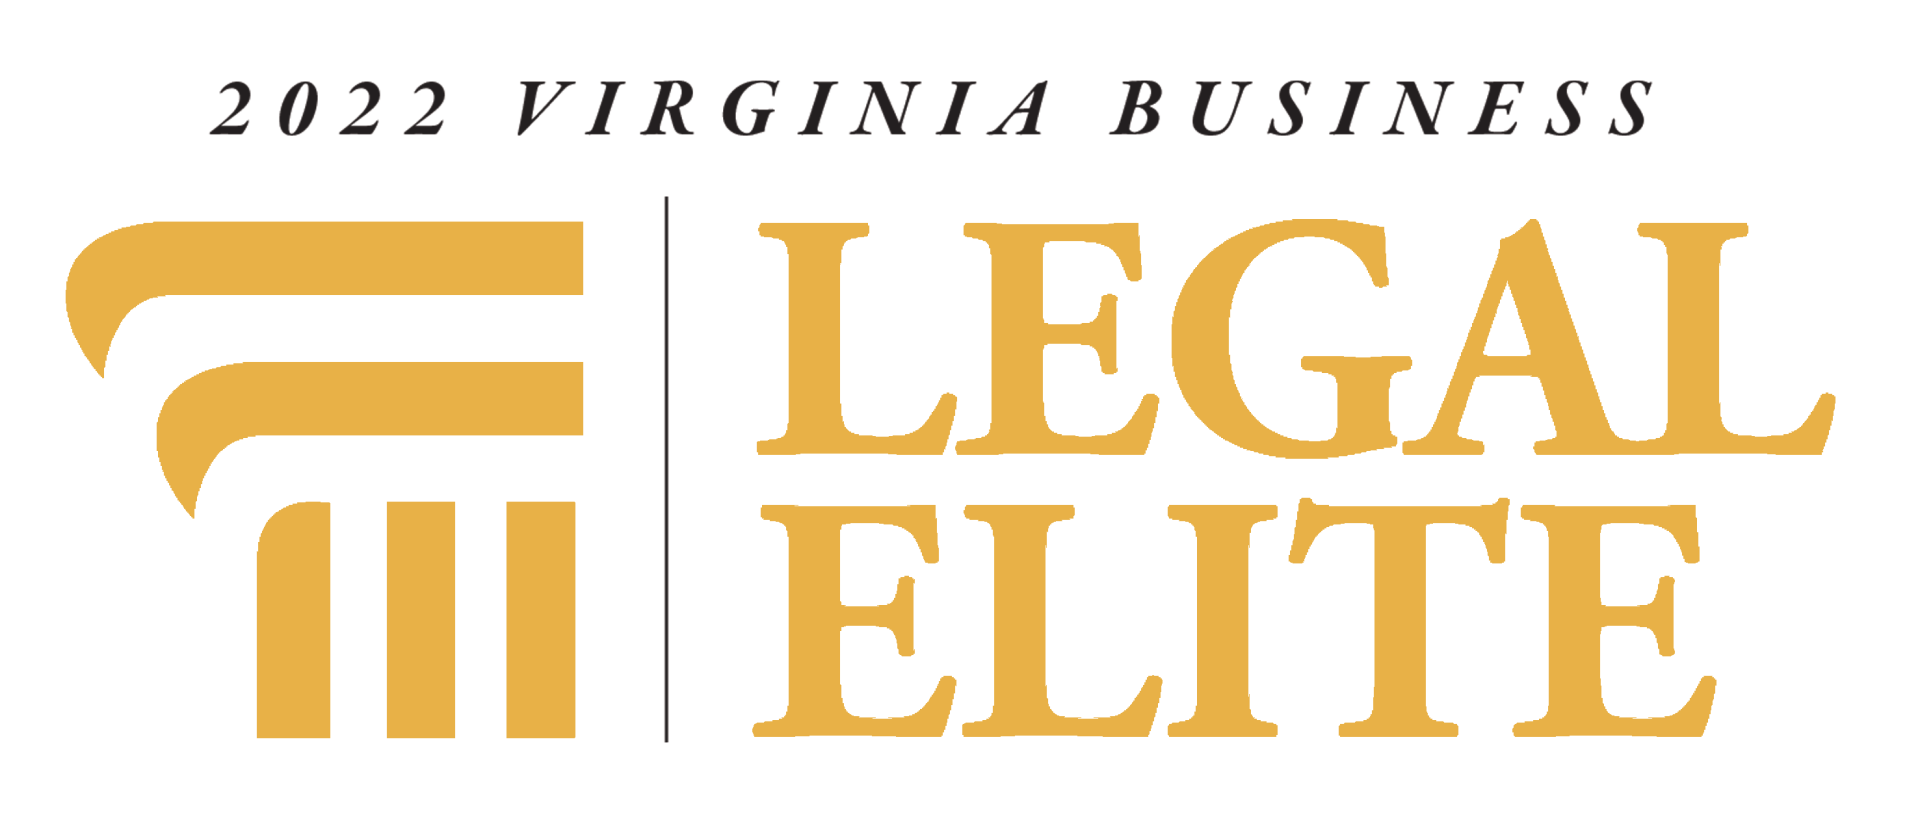 Diane Toscano Selected for Legal Elite 2022 One of Best Attorneys in Virginia